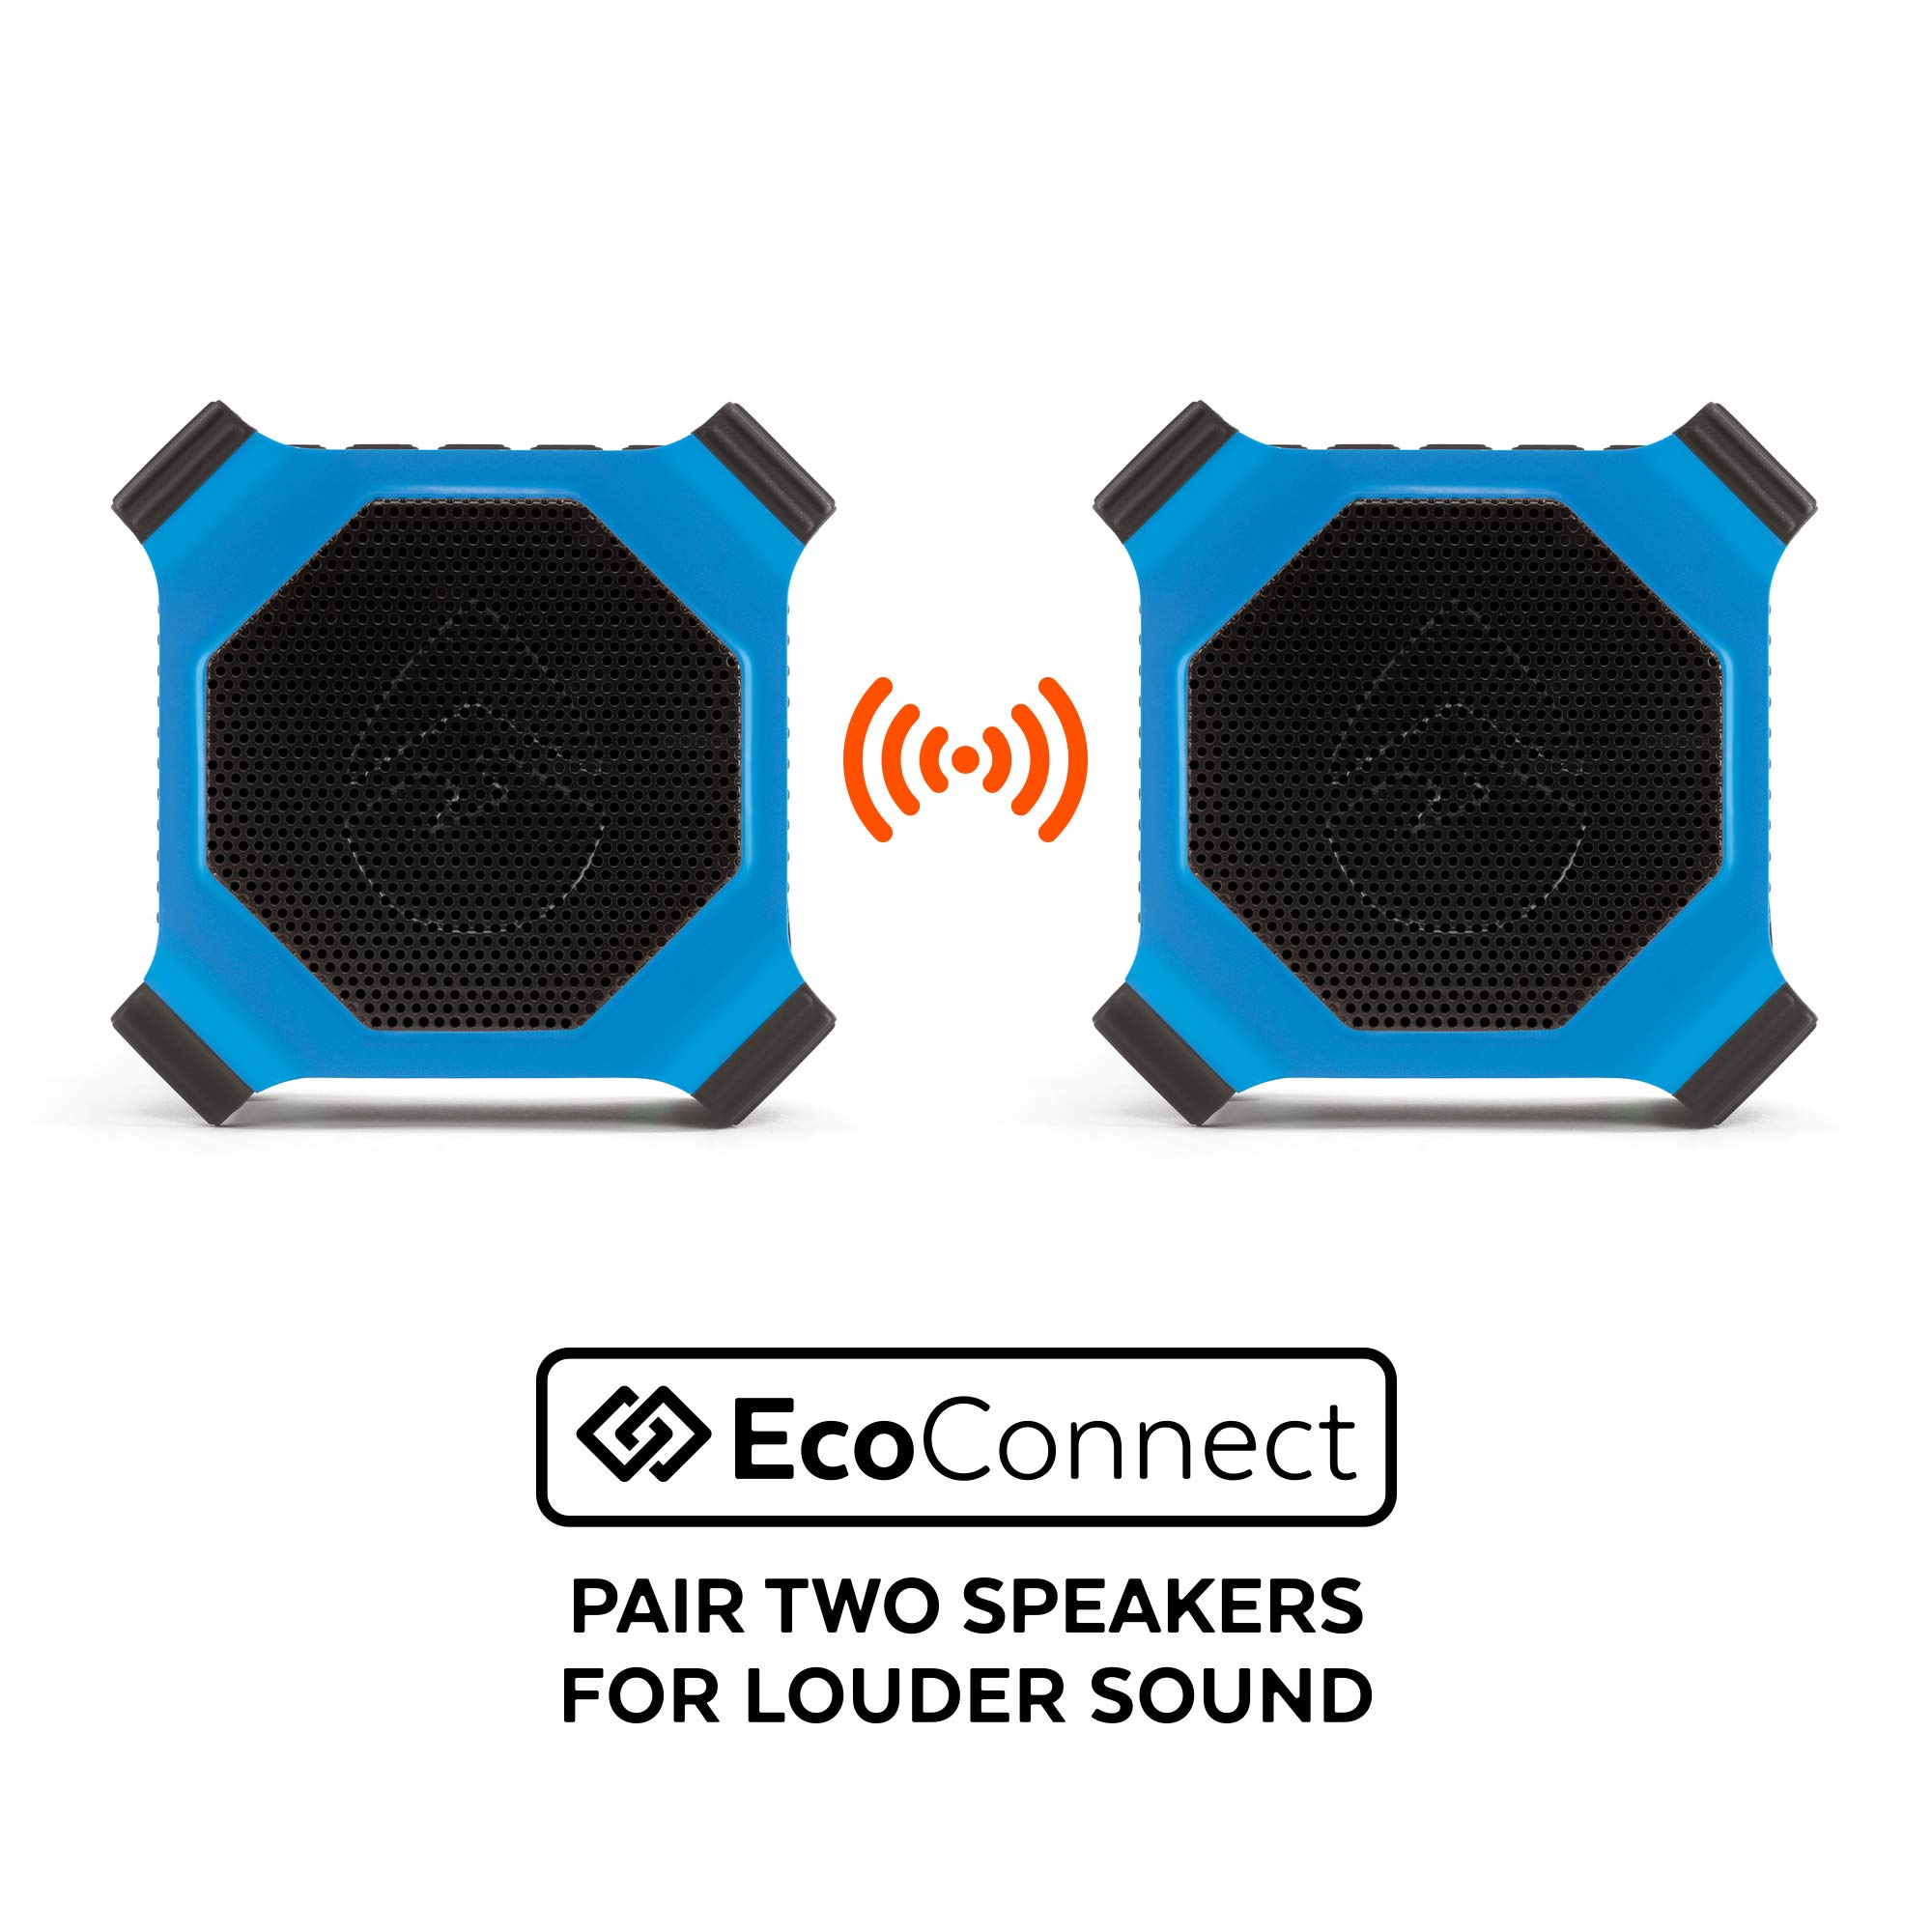 ECOXGEAR EcoEdge Plus GDI-EXEGPL402 Rugged Waterproof Floating Portable Bluetooth Speakers Wireless, 20W Smart Speaker with Bottle Opener and LED Party Lights, Indoor or Outdoor Party Speaker (Blue)